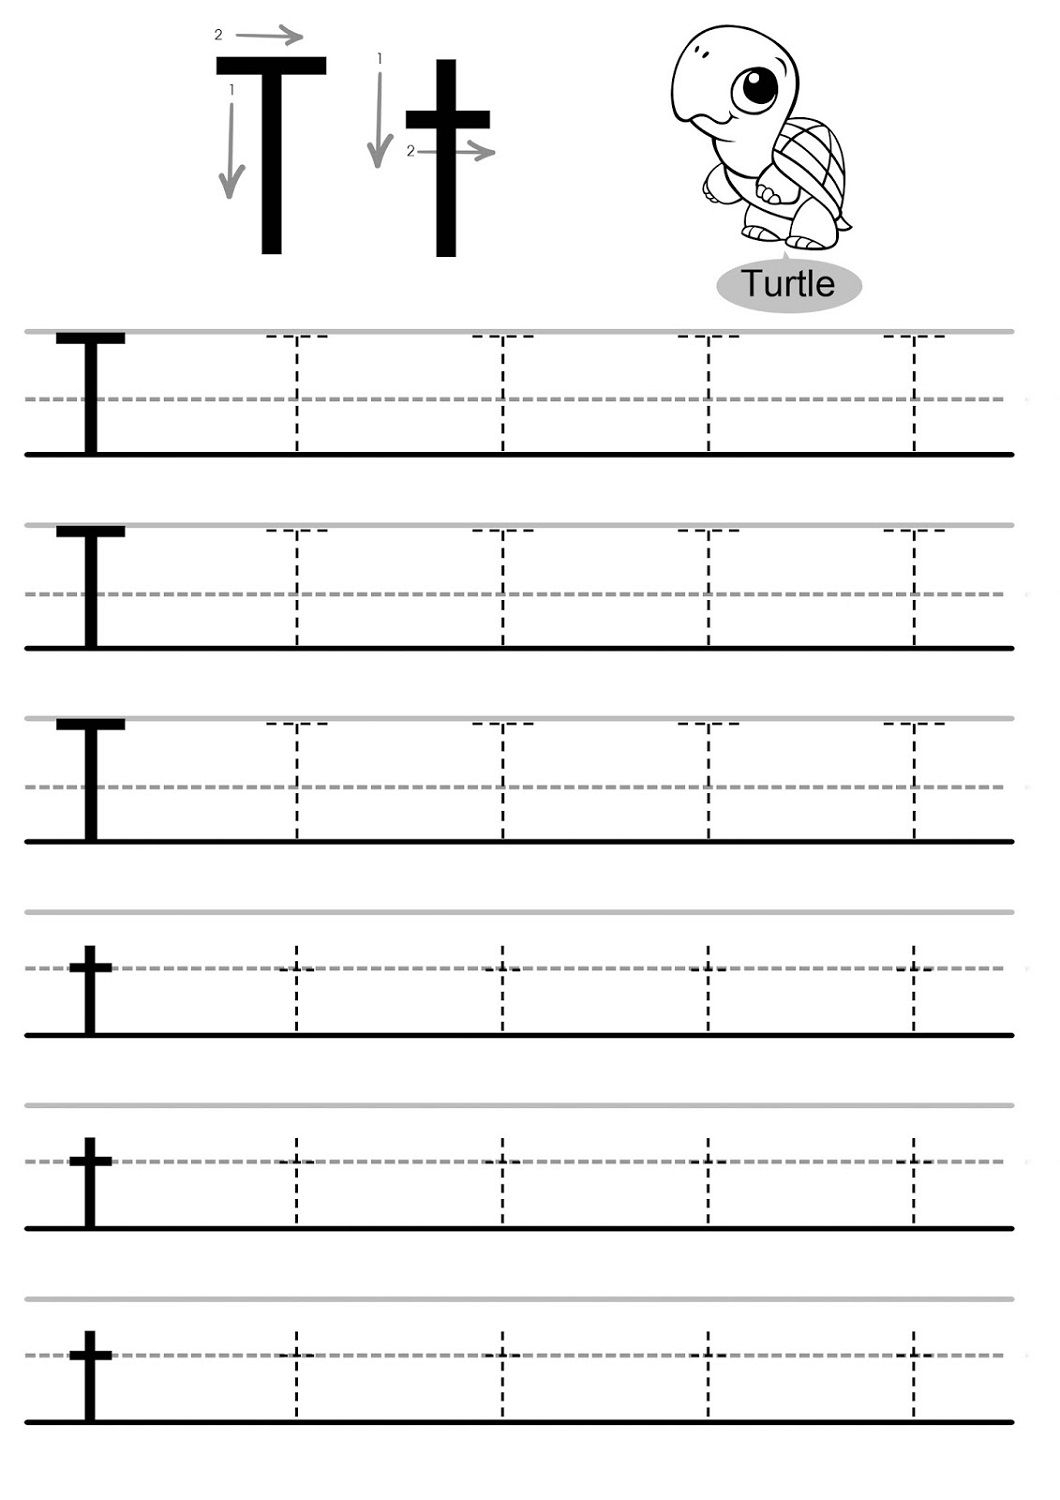 Traceable Letter Worksheets - Kids Learning Activity with regard to T Letter Worksheets